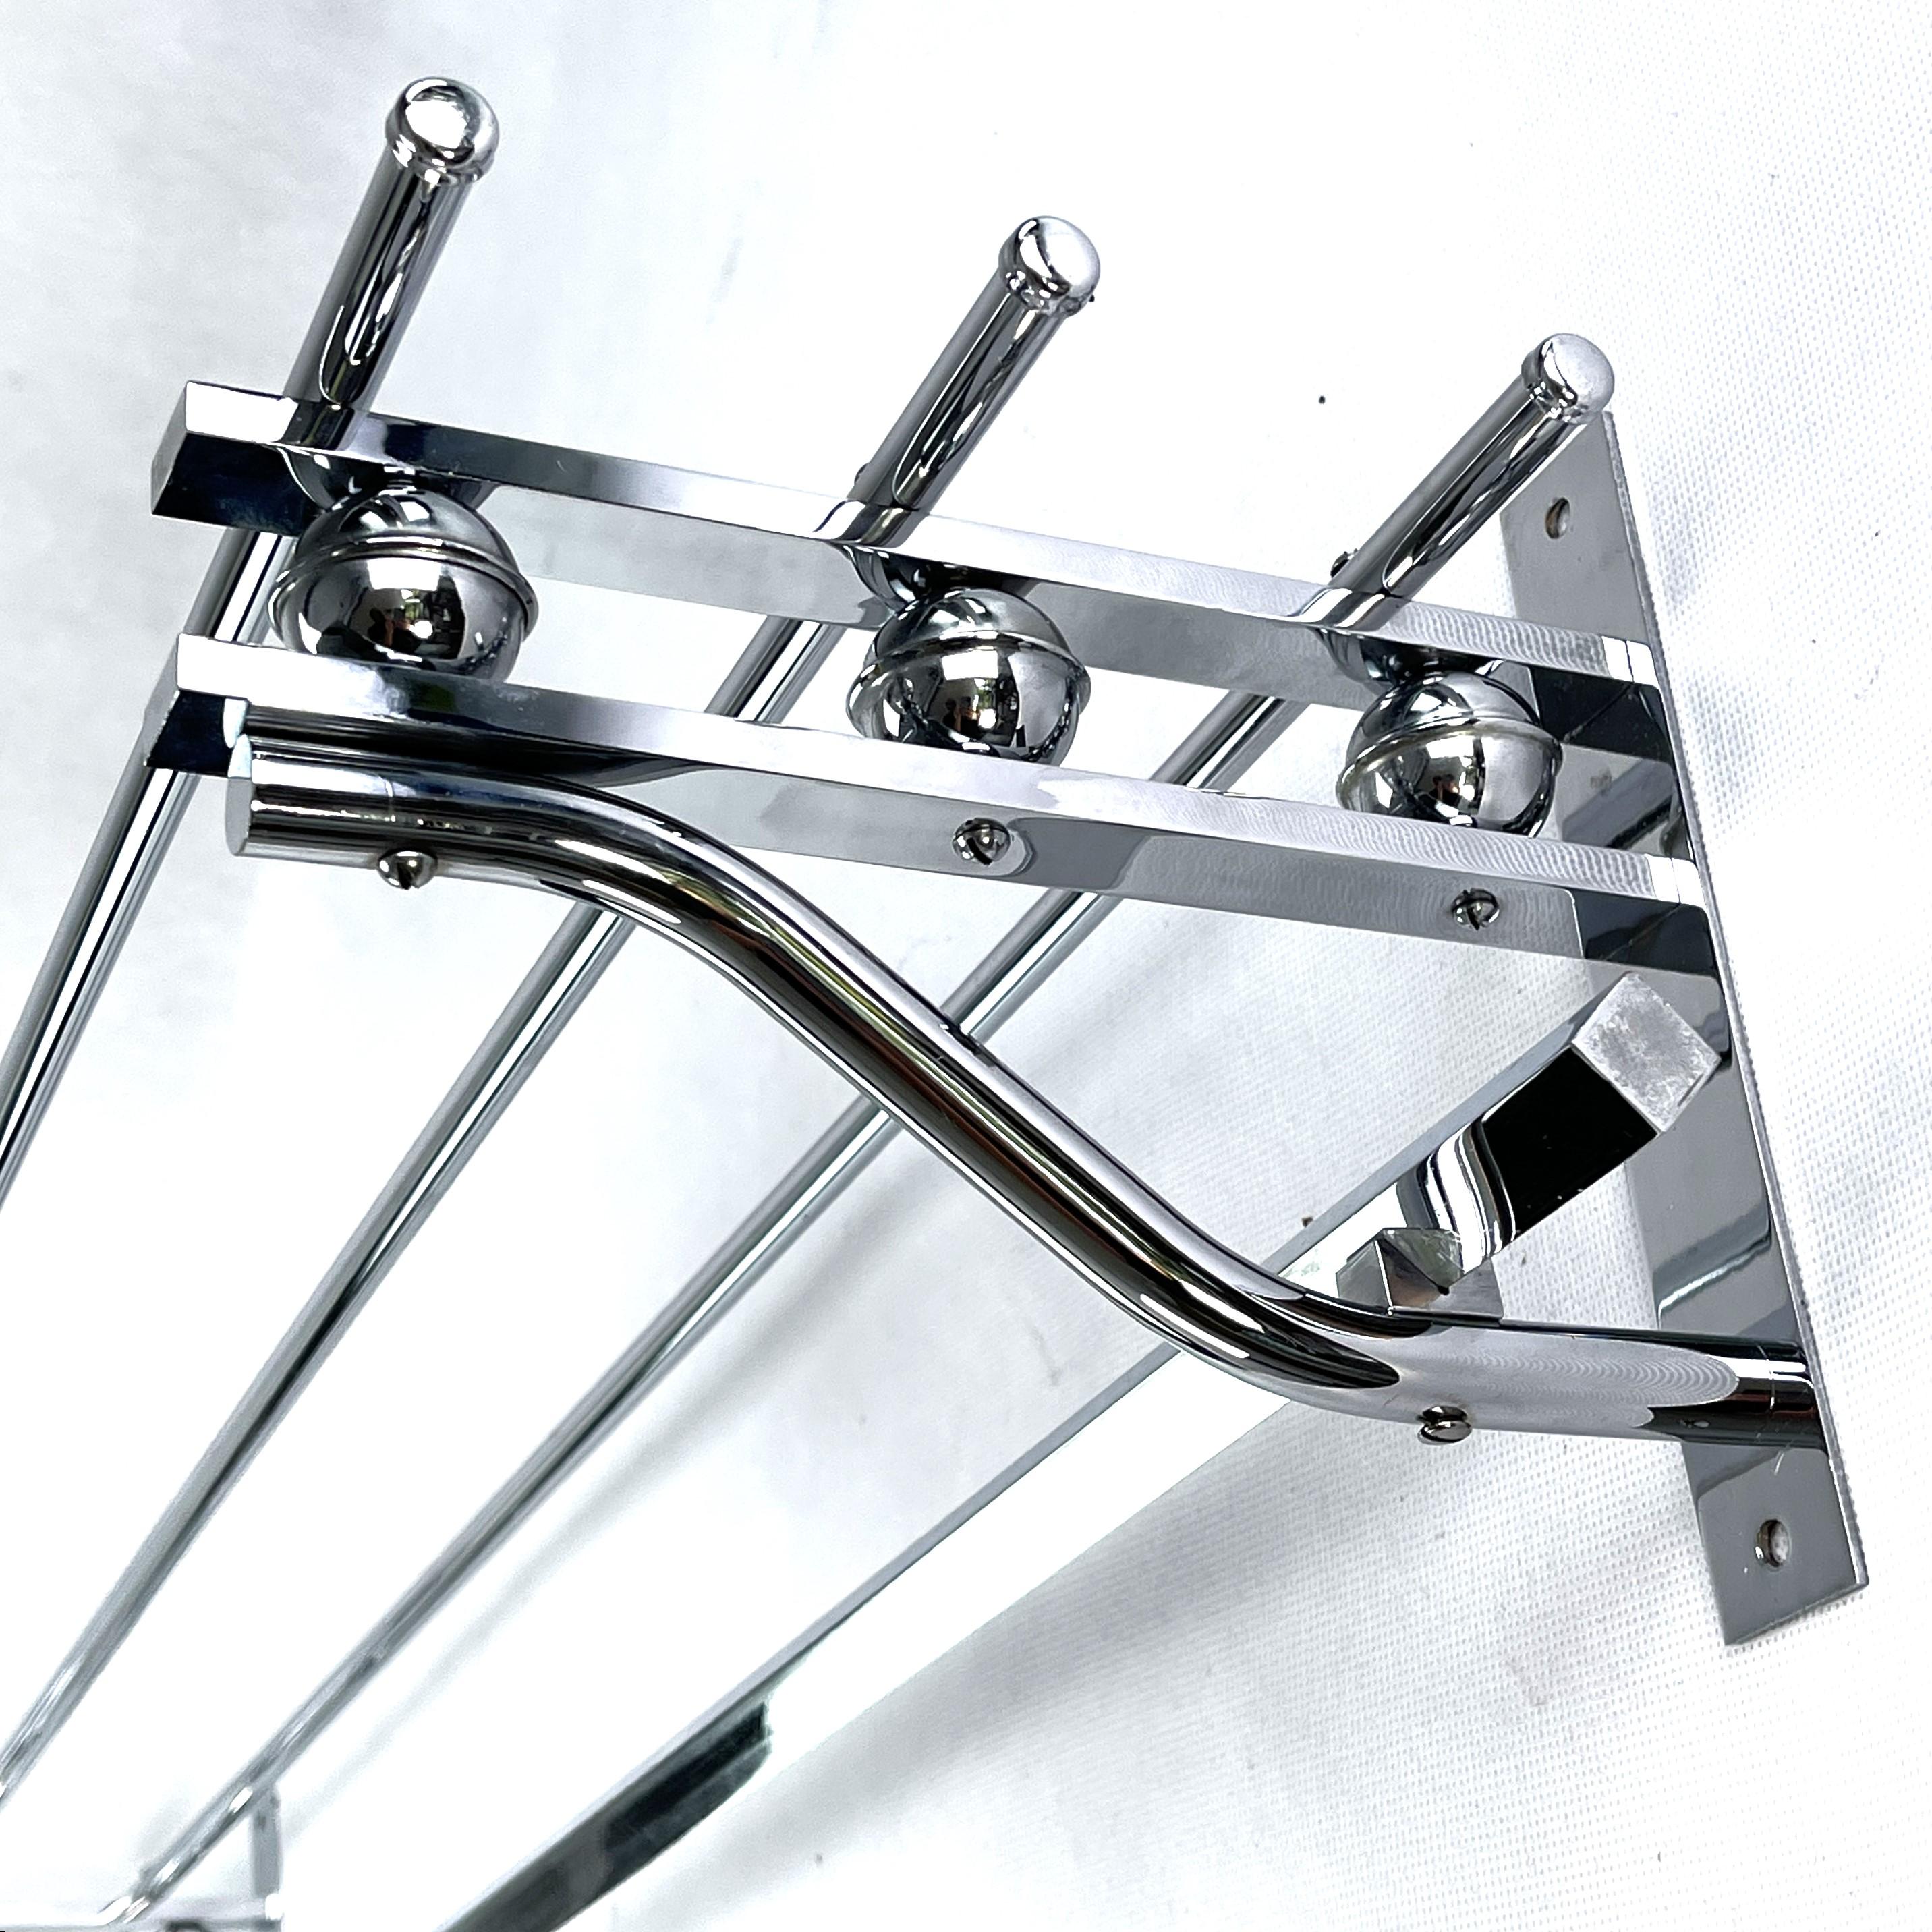 Art Deco wardrobe chrome - 1930s

This beautiful French wall coat rack from the 1930s is in the streamline modern Art Deco style. This style emphasized curvy streamlined shapes. This is a beautiful, timeless and antique piece that will leave a